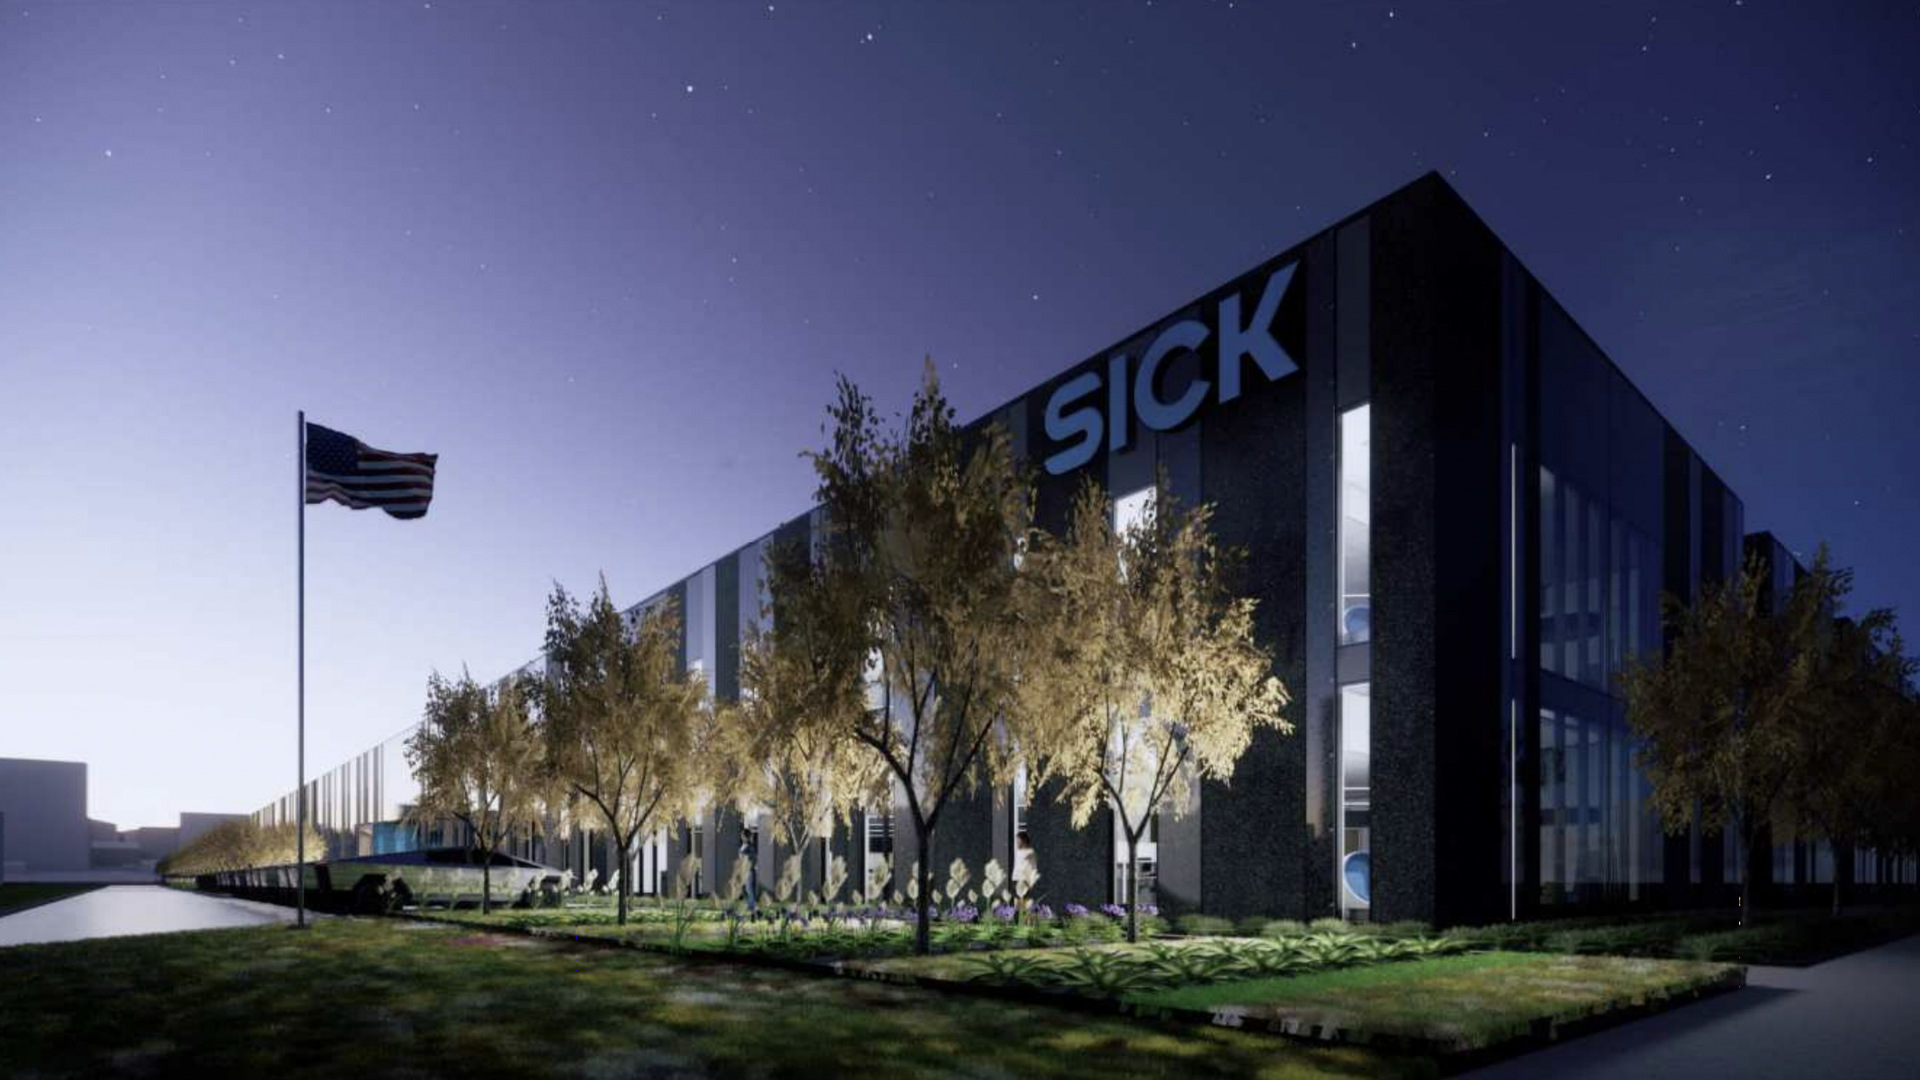 A rendering of an industrial building at night with a blue SICK sign. 